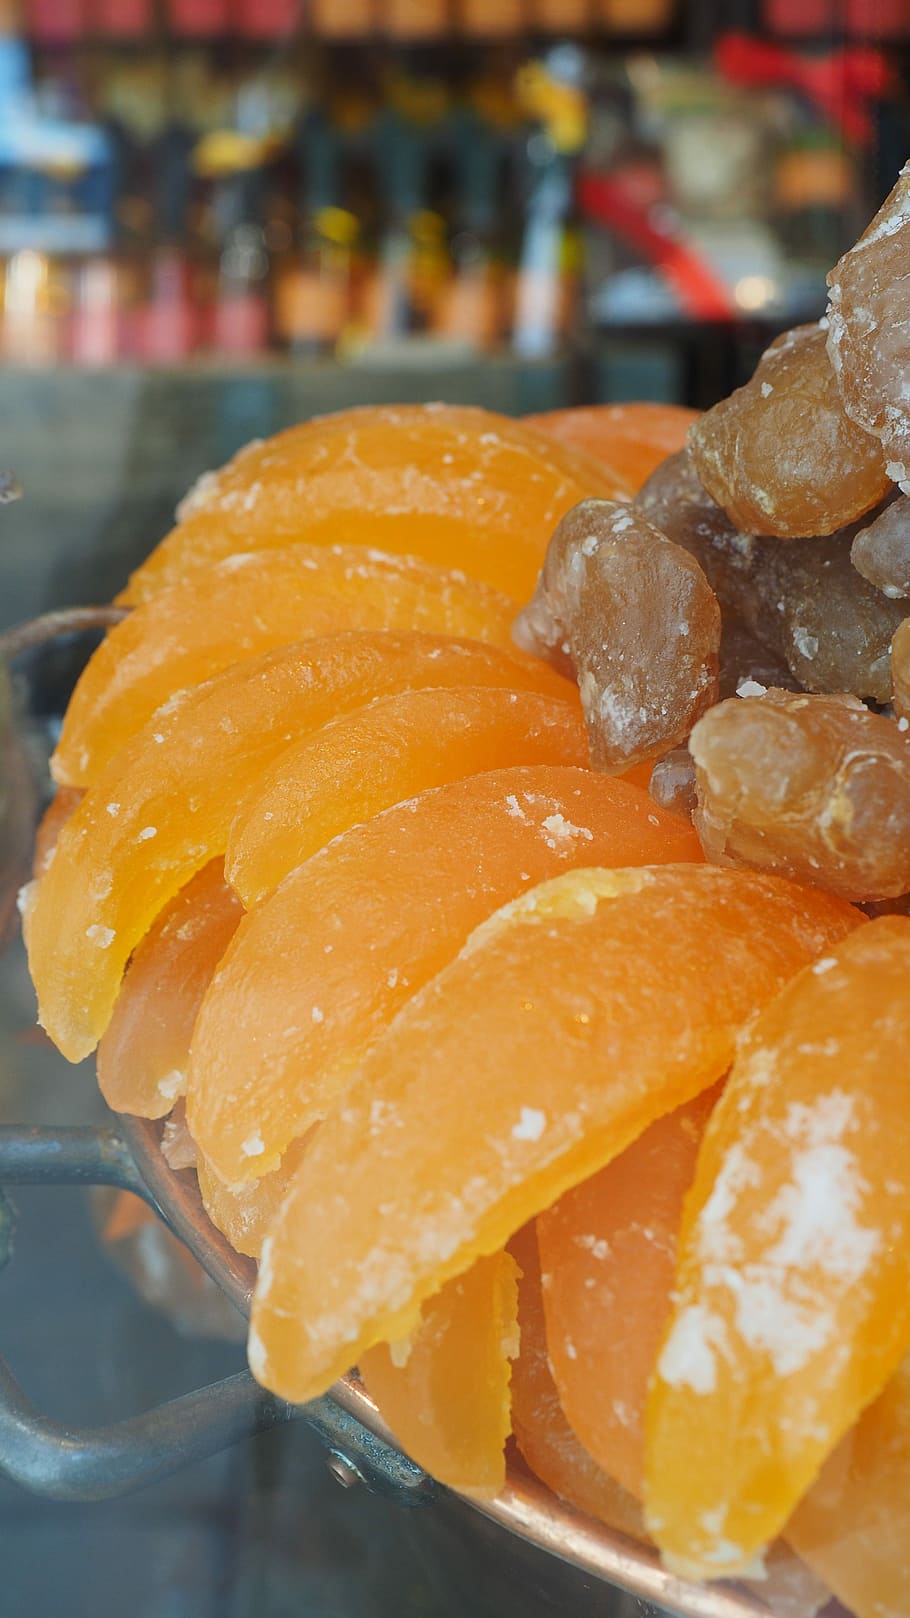 Candied Fruit, Fruits, candied, konfiert, method of preservation, preserved, oranges, sweet, zuckrig, orange sections